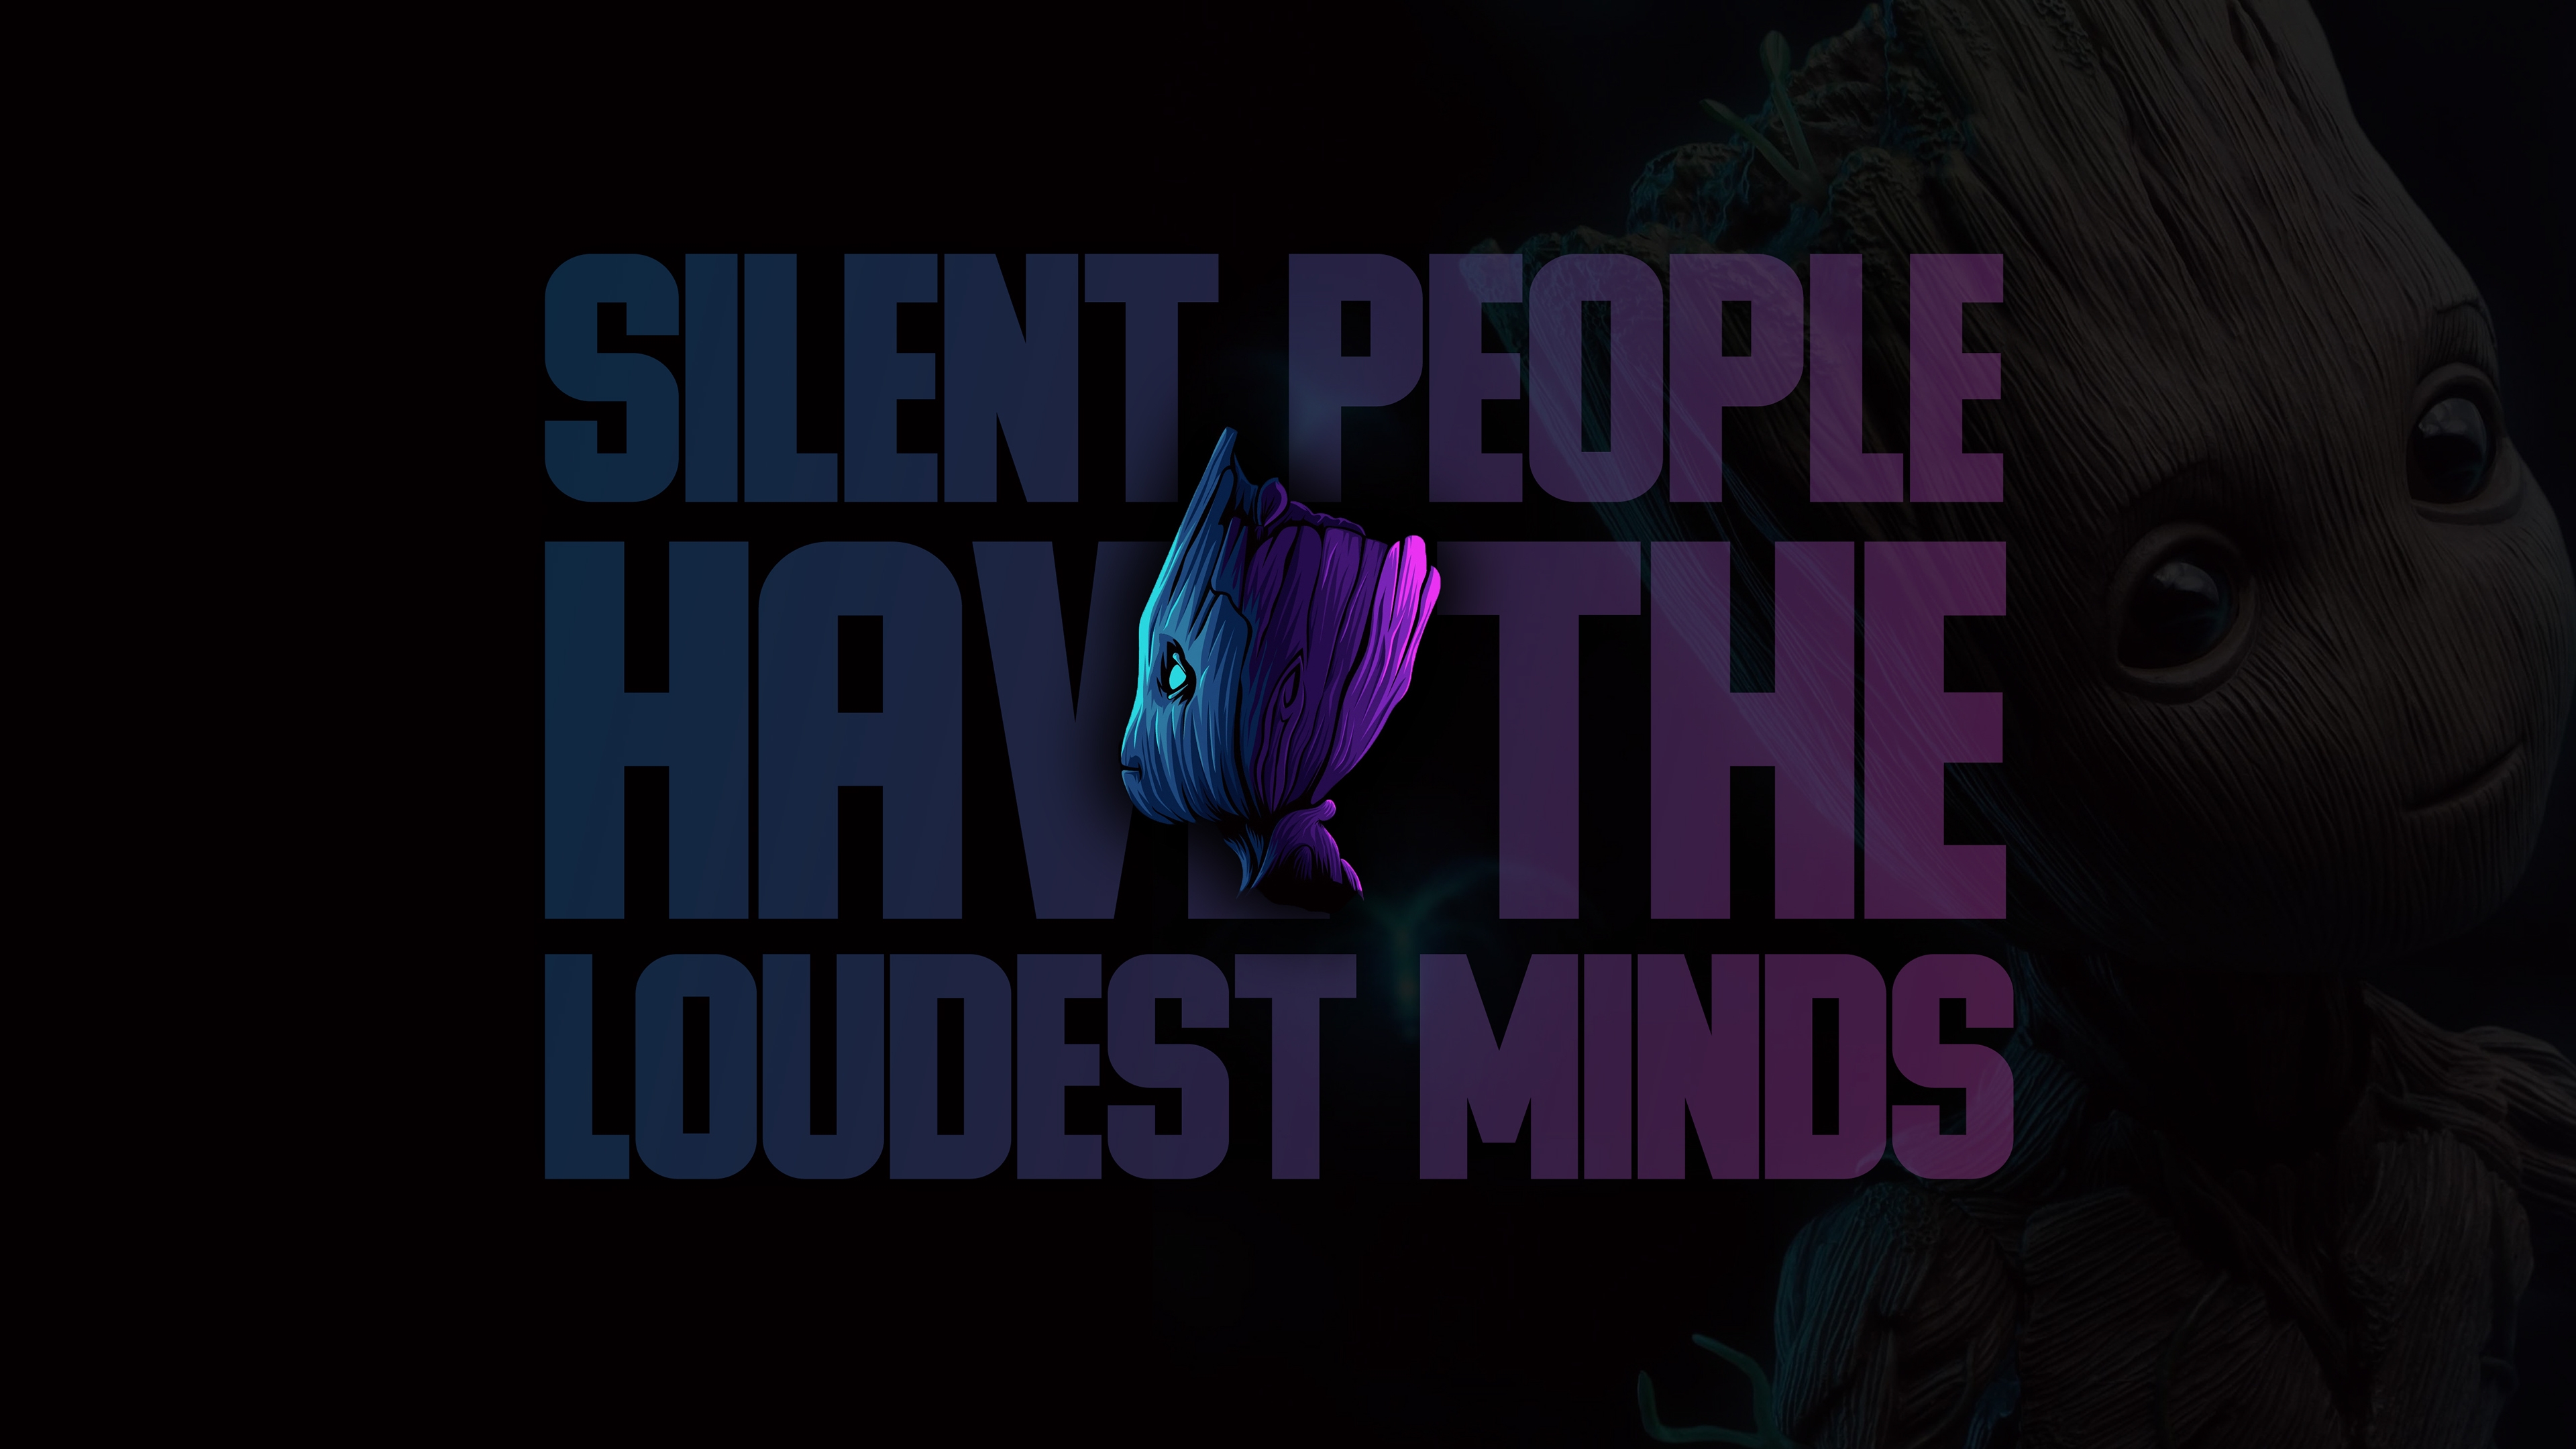 HD wallpaper, Silent People Have The Loudest Minds, Dark, Baby Groot, Popular Quotes